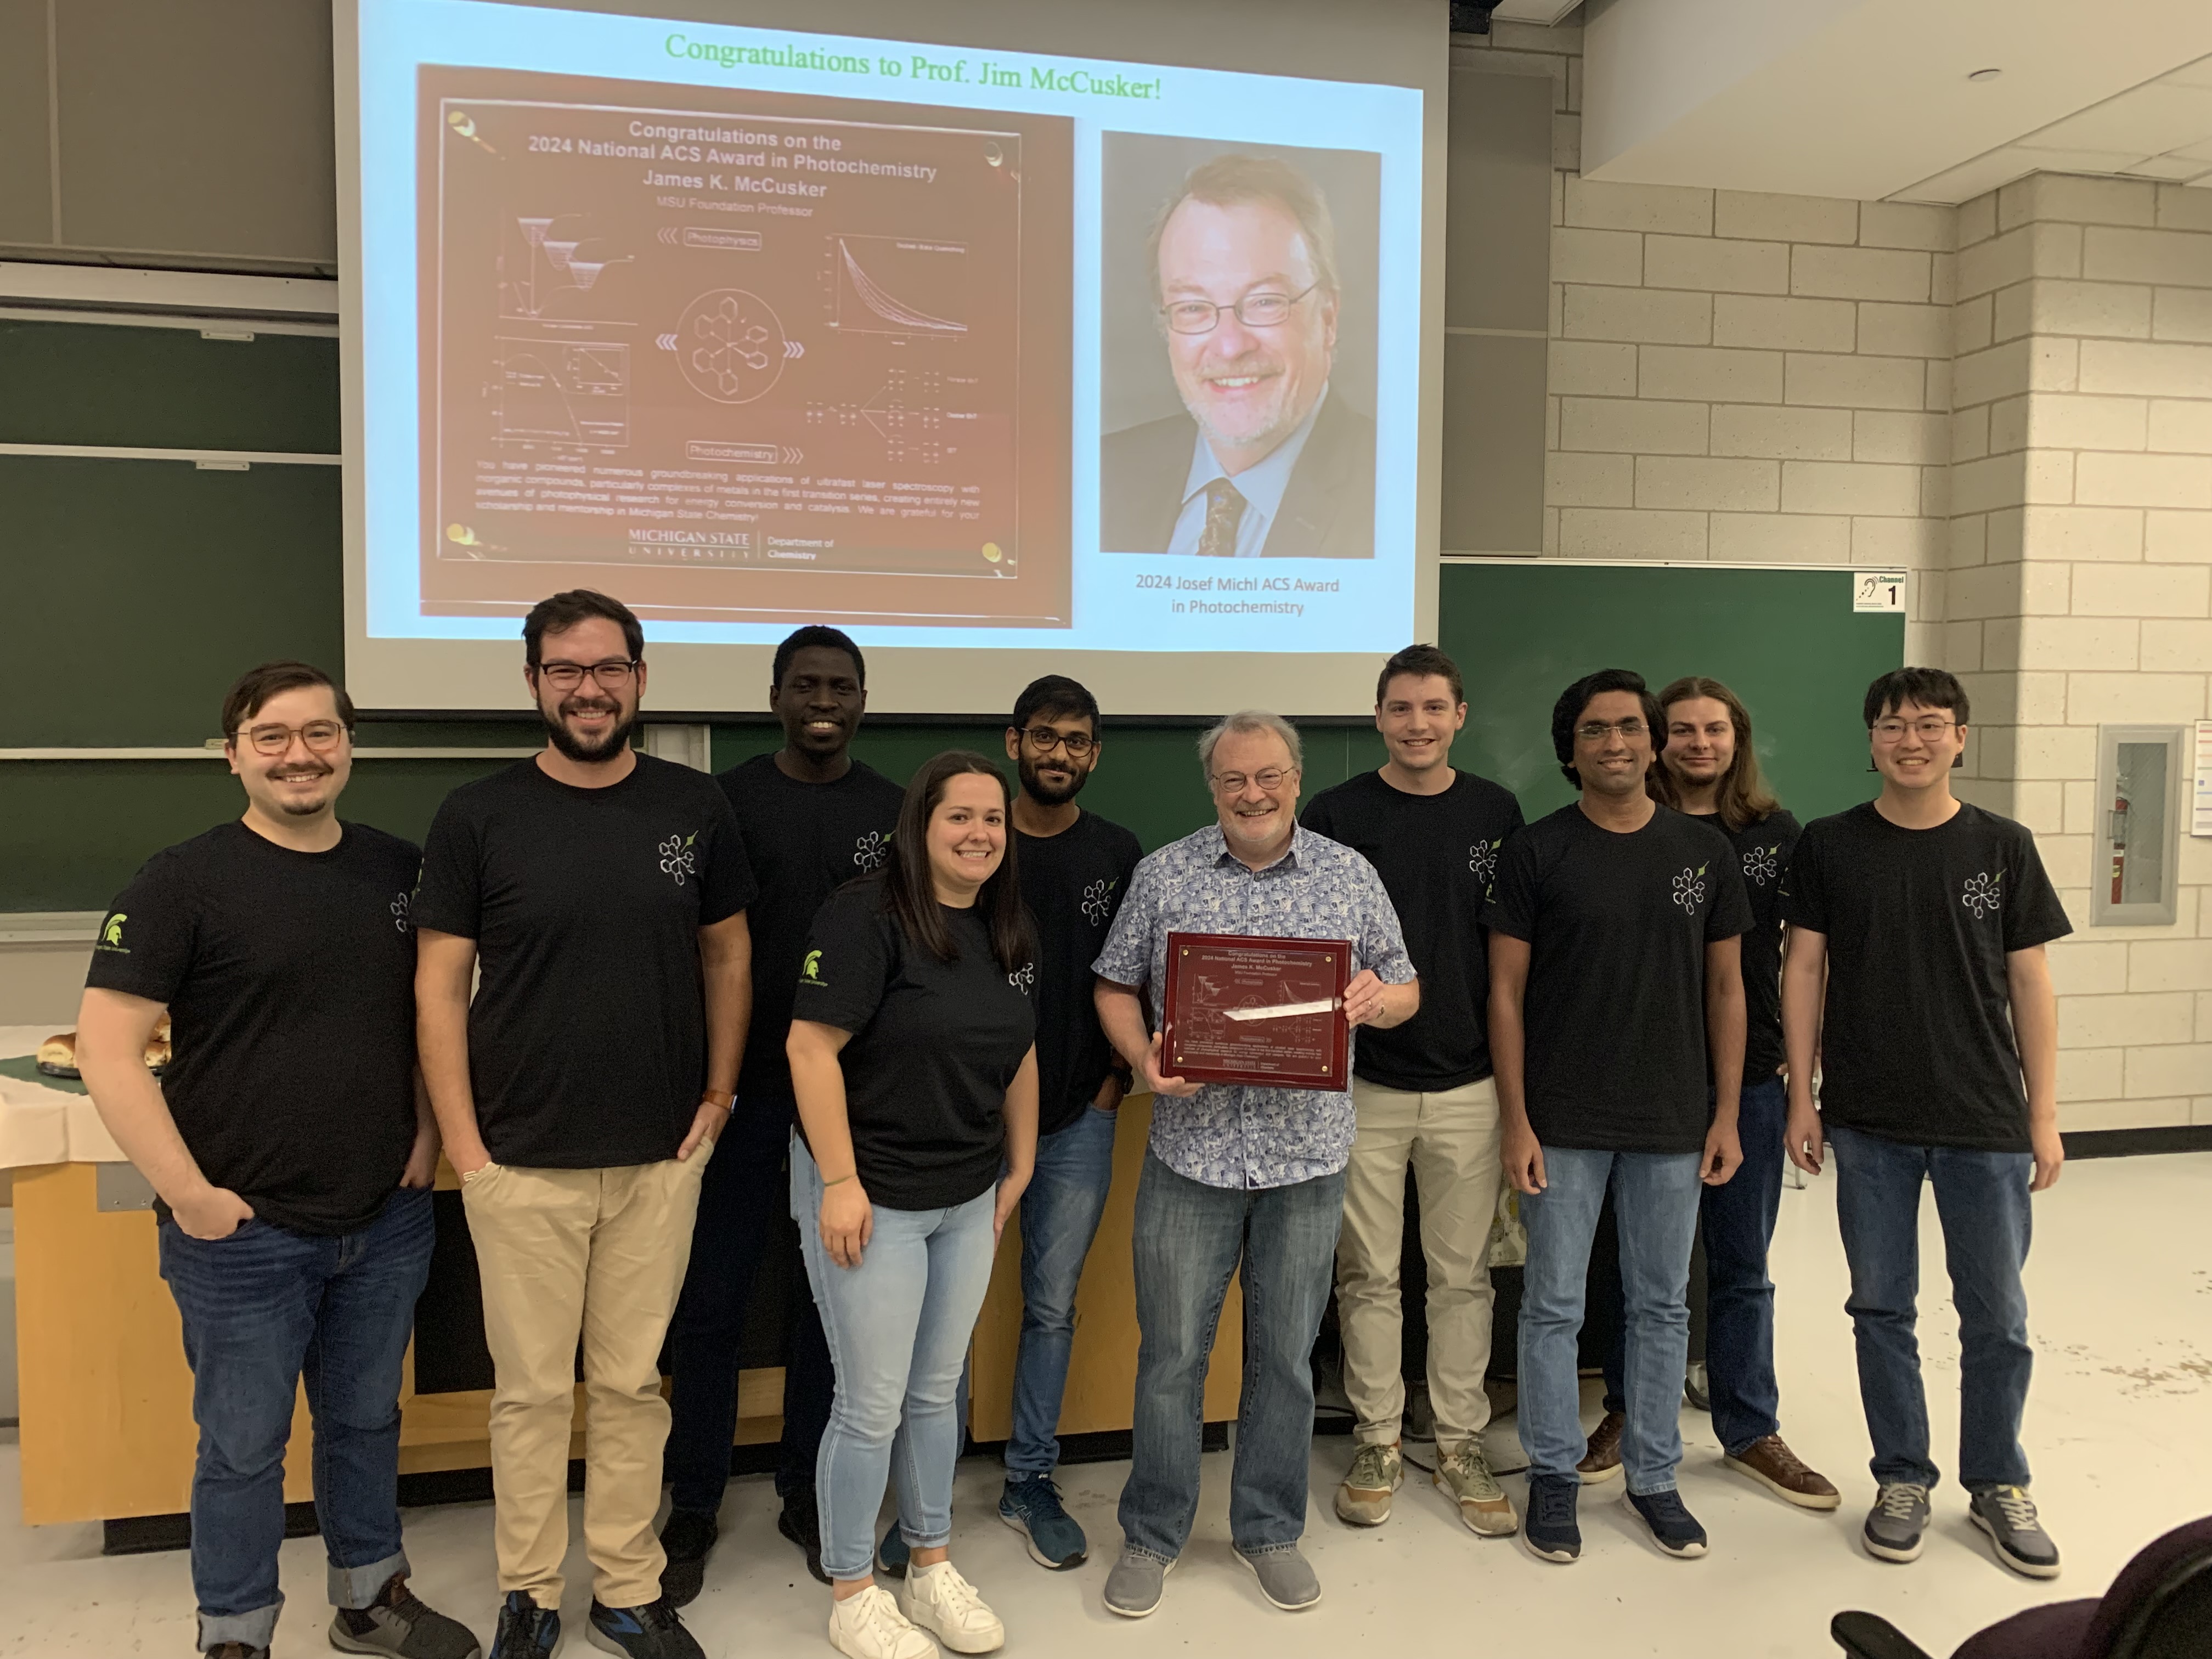 Professor James K. McCuskers poses with lab members and a plaque commemorating his Josef Michl ACS Award in Photochemistry.